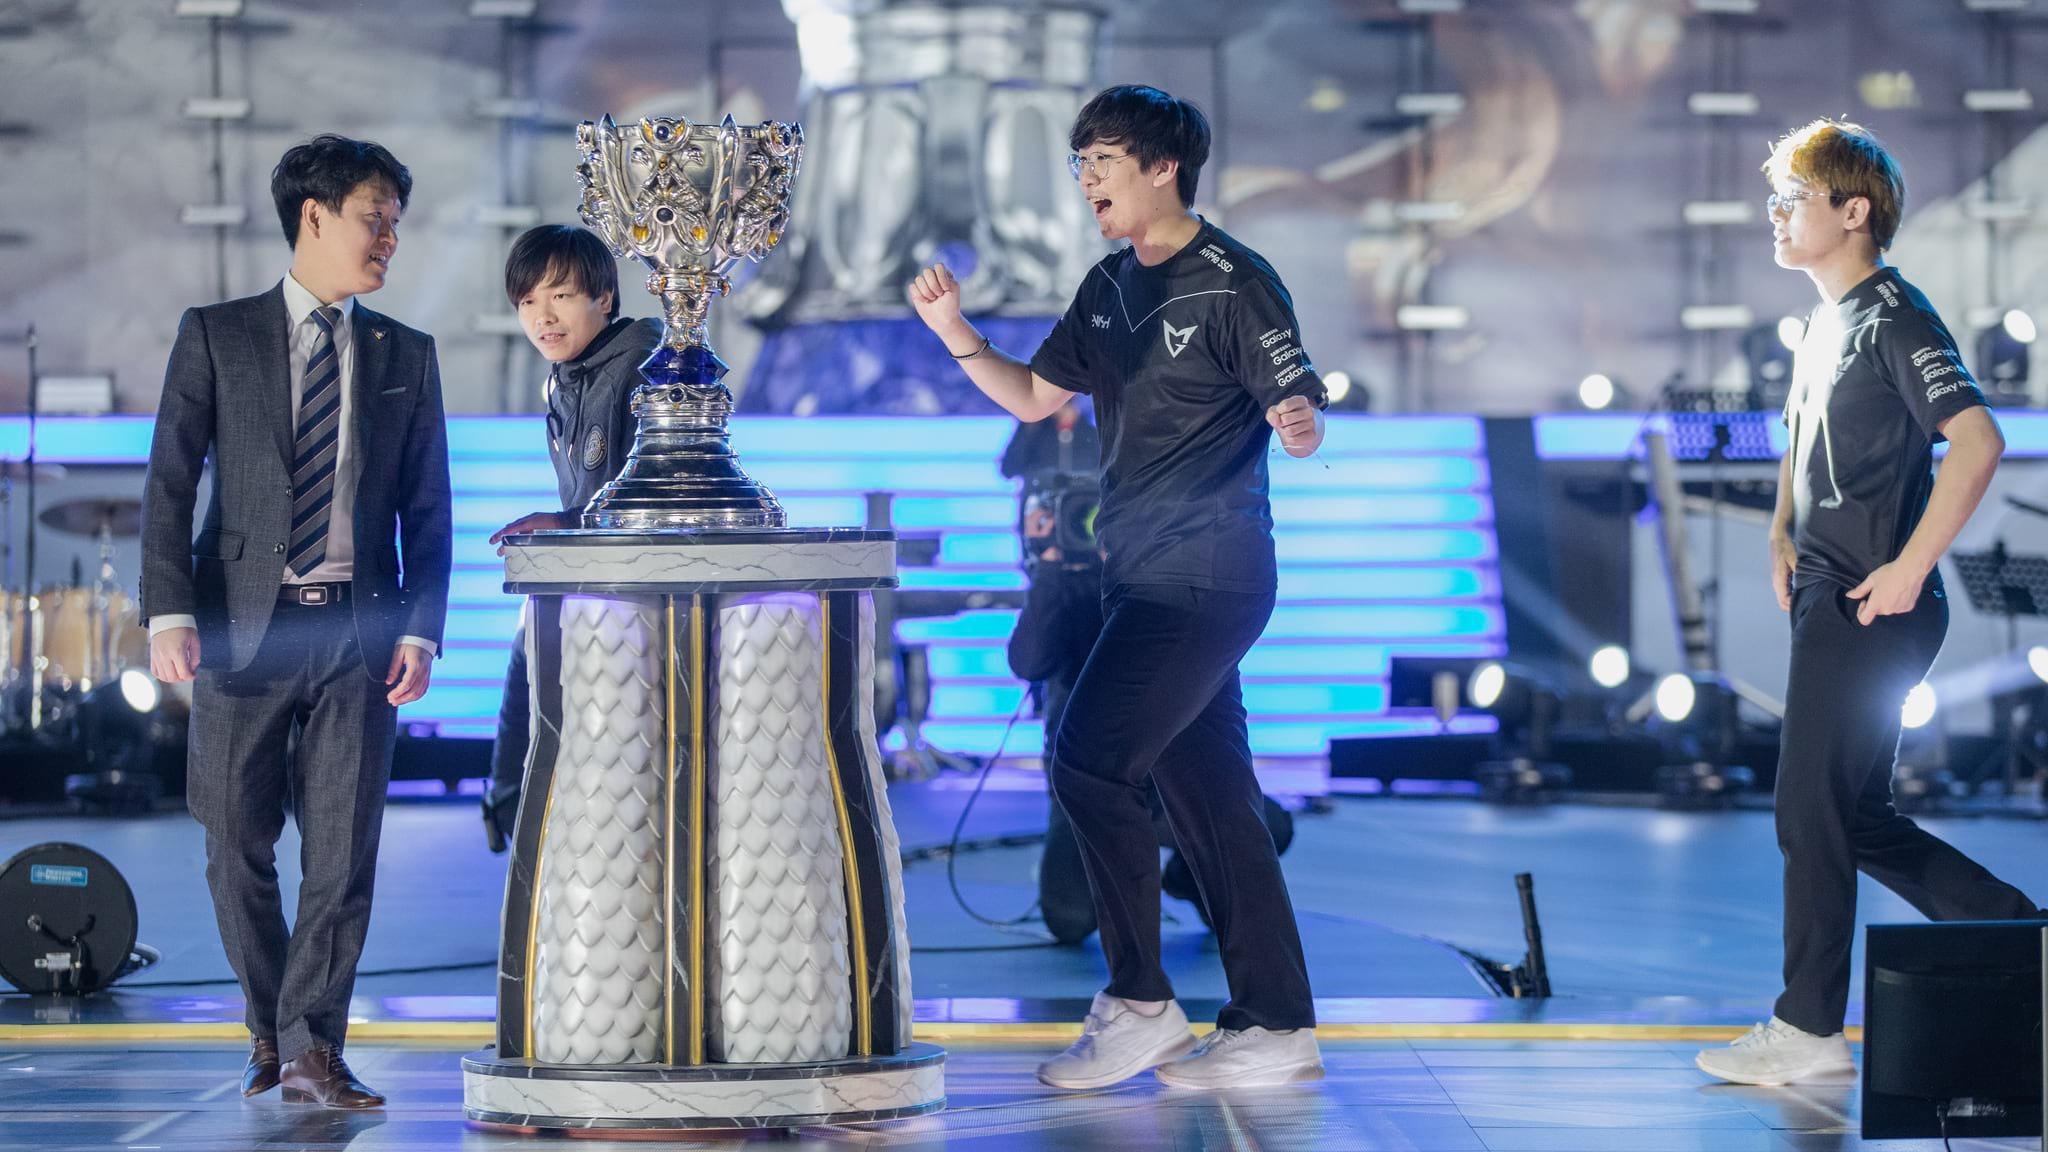 LoL Worlds firsts – multiple records broken at the 2018 World Championship  - Dexerto